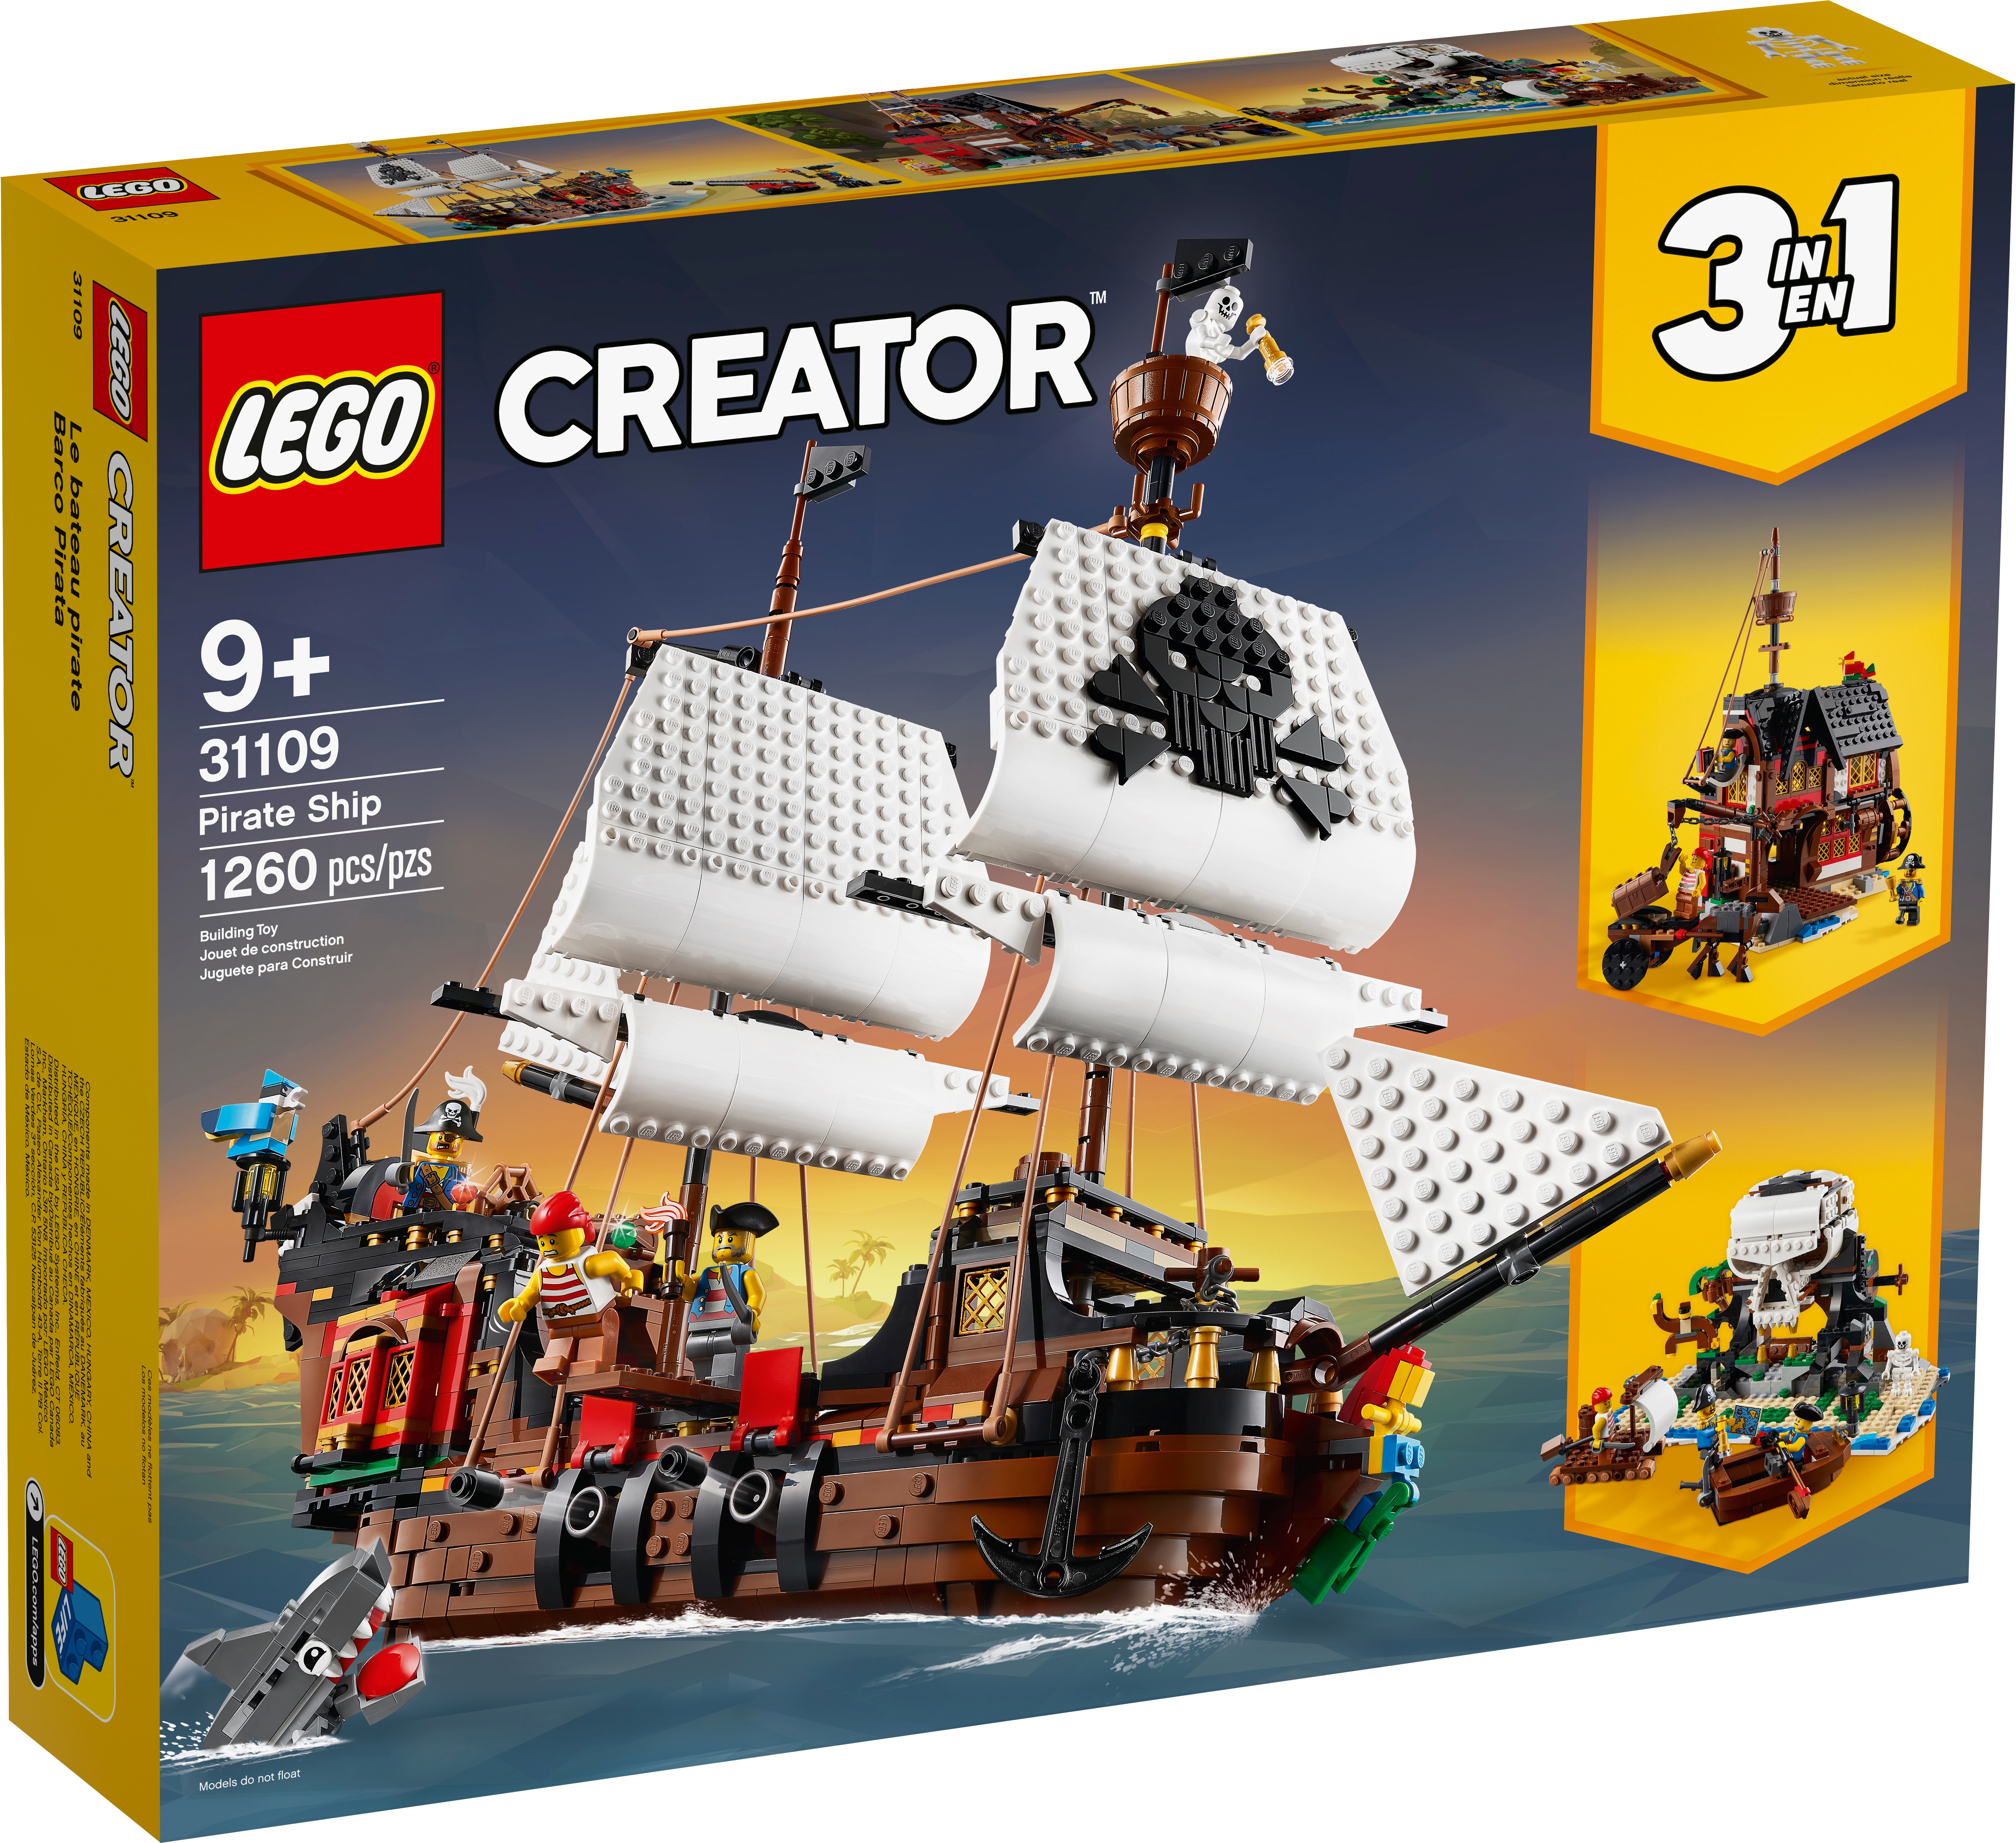 Pirate Ship 31109 | Creator 3-in-1 online at the Official LEGO® Shop US